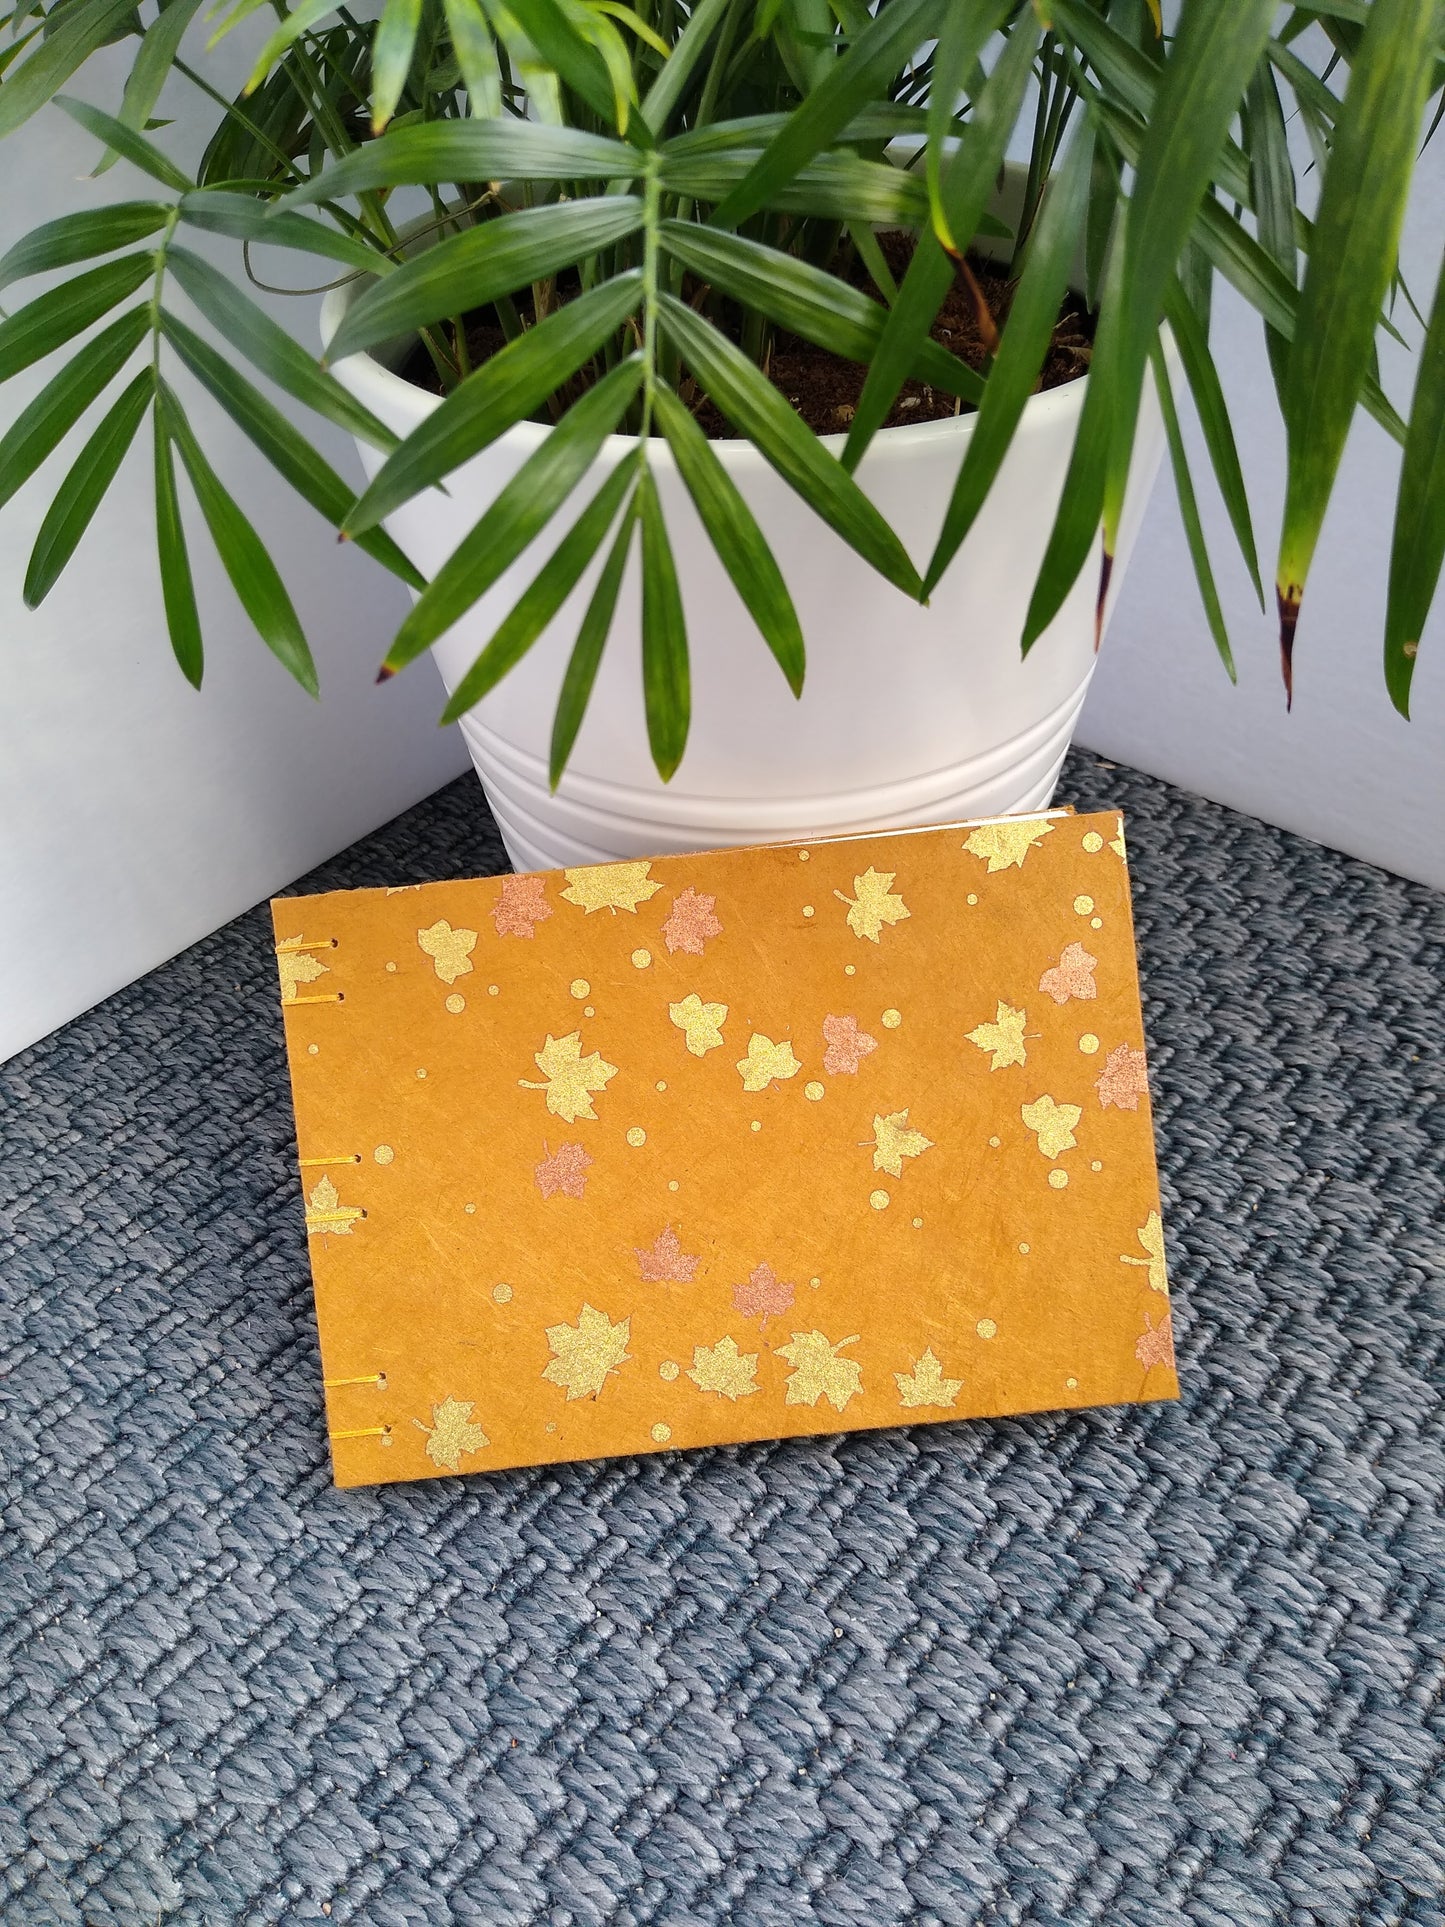 A handmade journal rests against a potted plant on a grey carpet. The cover of the journal is burnt orange with gold and copper maple leaves.